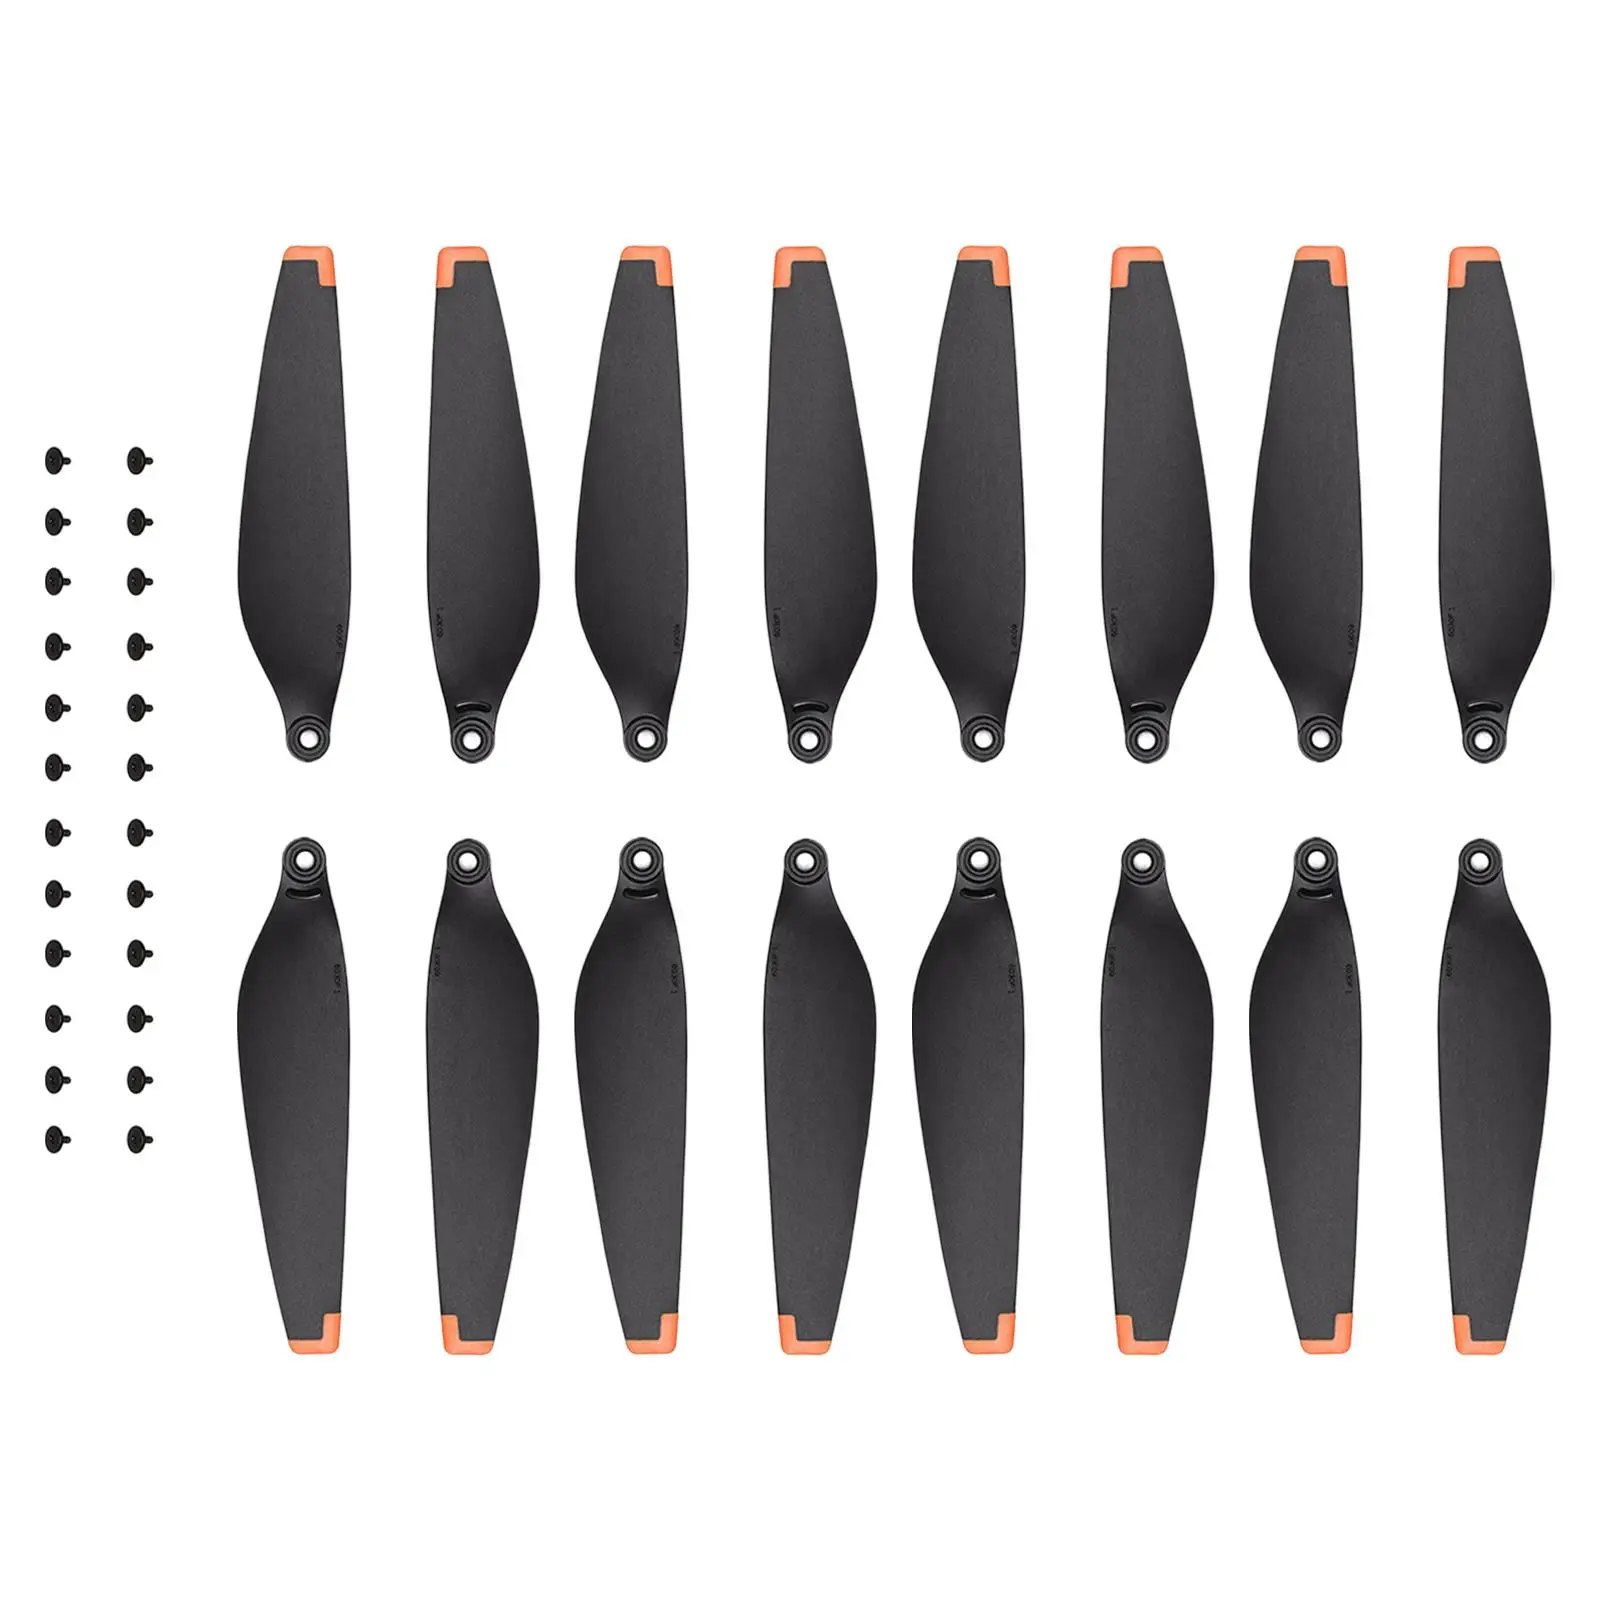 Propellers for Mavic Mini 3 Pro Light in Weight Silent Flight Stable Momentum Low Noise Aircraft Propellers Orange Tip